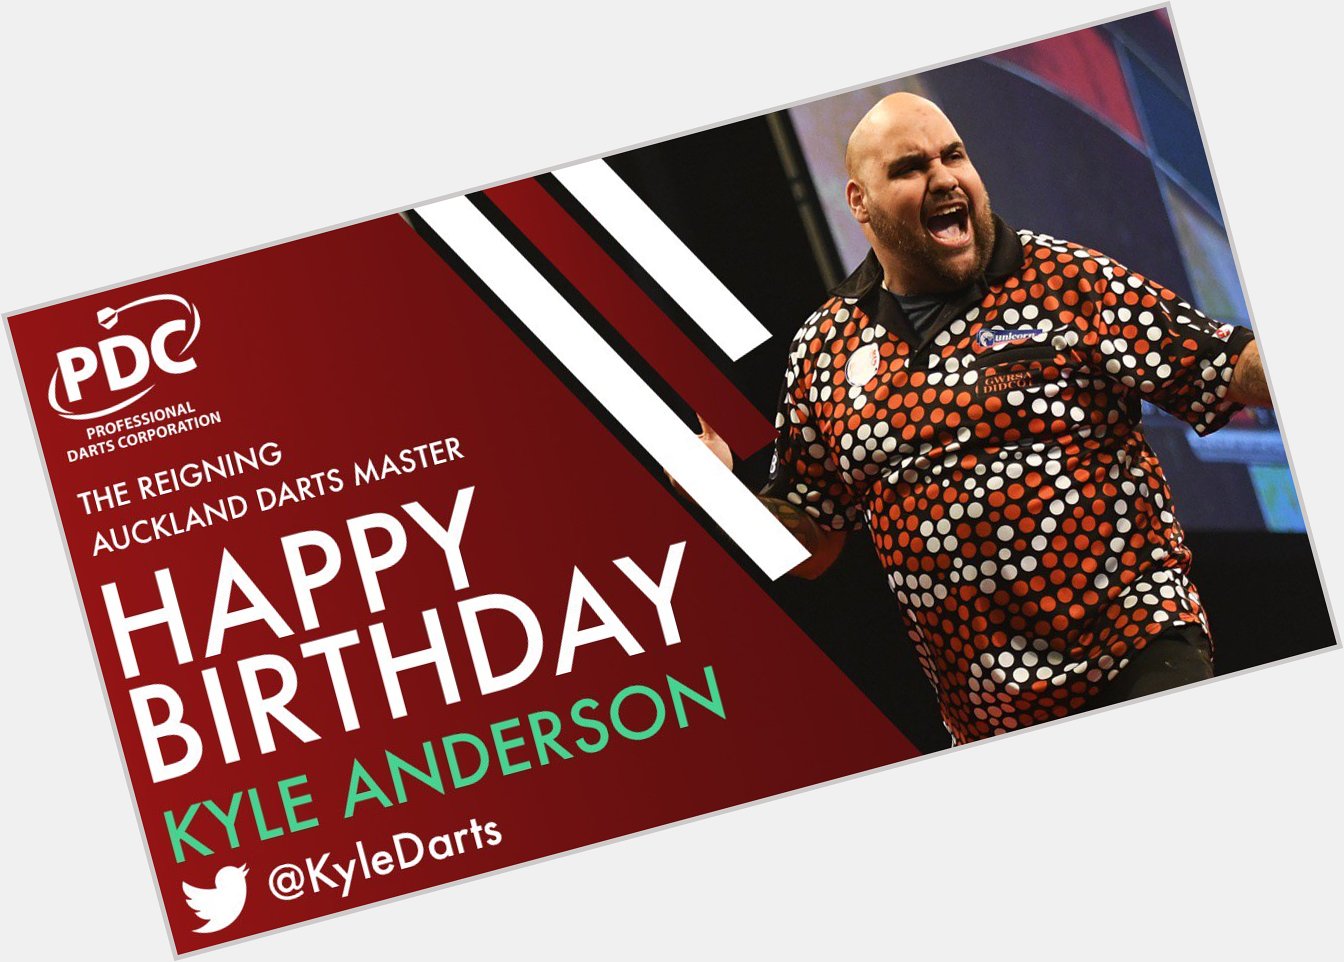 HAPPY BIRTHDAY to the reigning Auckland Darts Master Kyle Anderson, who turns 30 today!   